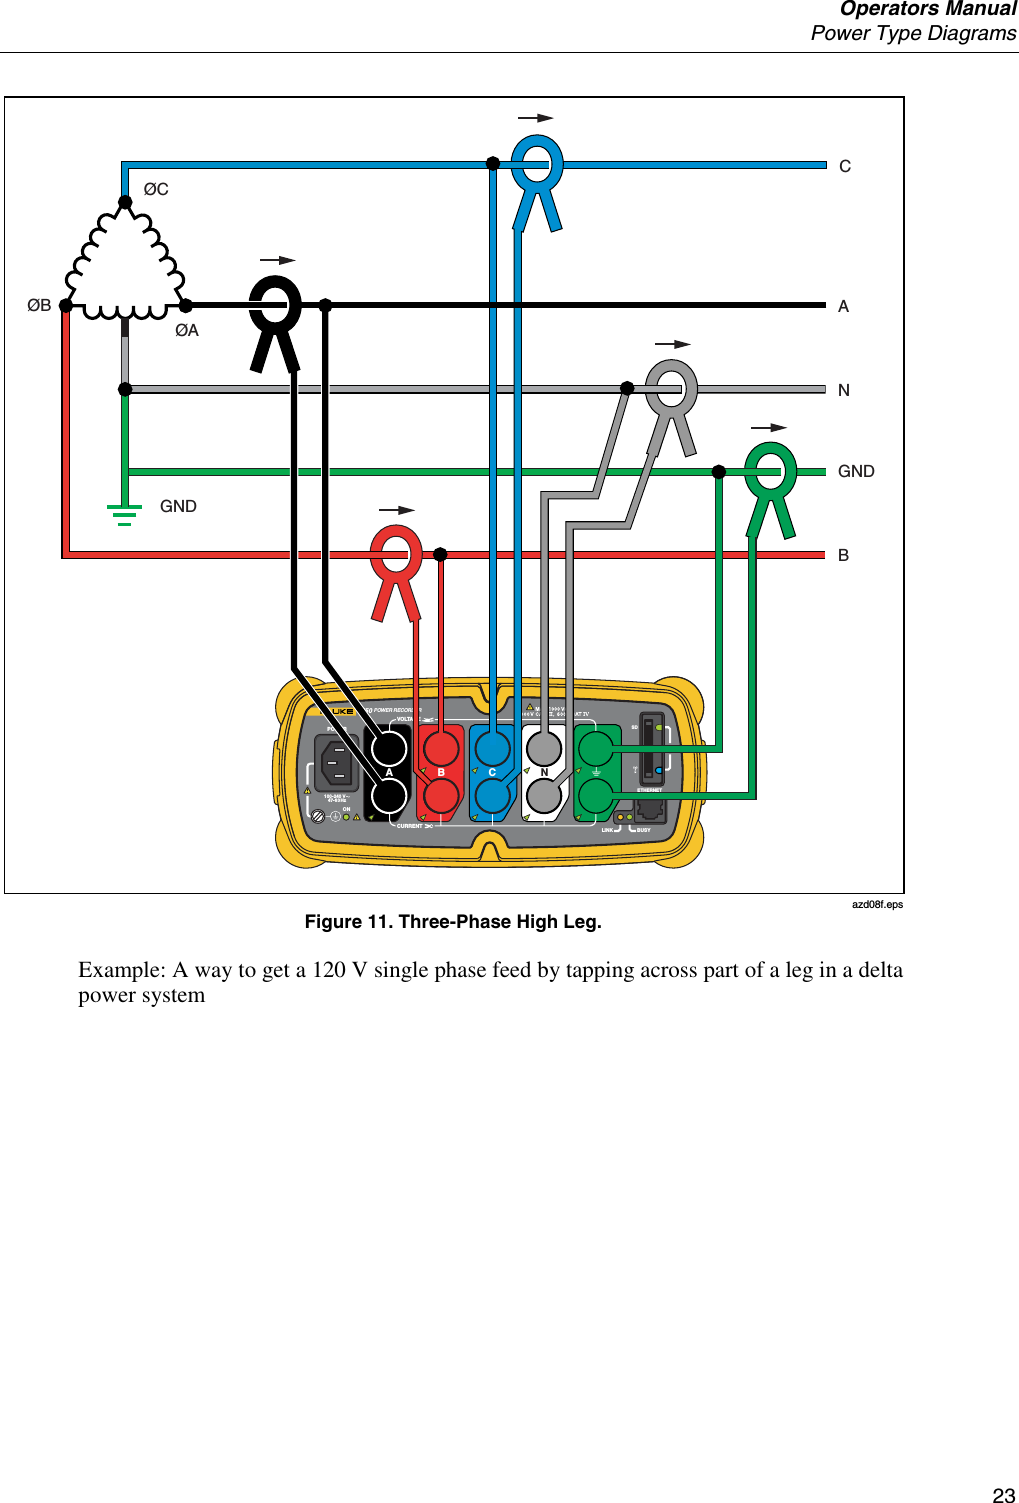  Operators Manual  Power Type Diagrams     23 SDETHERNETPOWER1750 POWER RECORDERONBUSYLINK100-240 V   47- 63HzBACNVO LTAG ECURRENTGNDØCABCNGNDØBØA azd08f.eps Figure 11. Three-Phase High Leg. Example: A way to get a 120 V single phase feed by tapping across part of a leg in a delta power system 